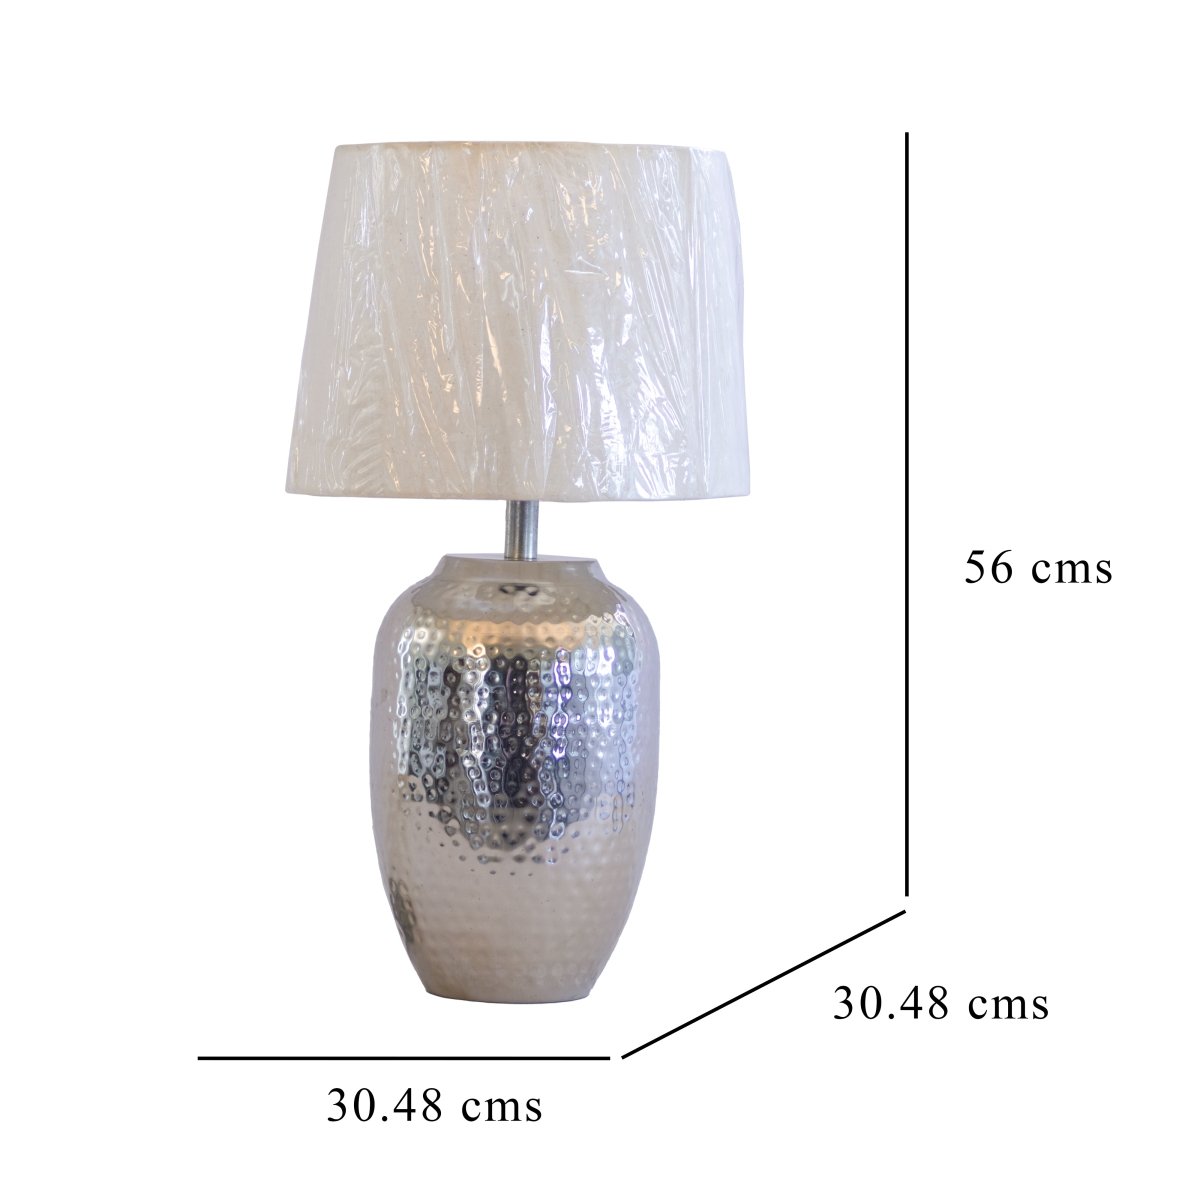 Kezevel Metal Decor Table Lamp - Glossy Nickel Finish Side Lamp with Fabric Shade for Home Decoration, Bedside Lamp